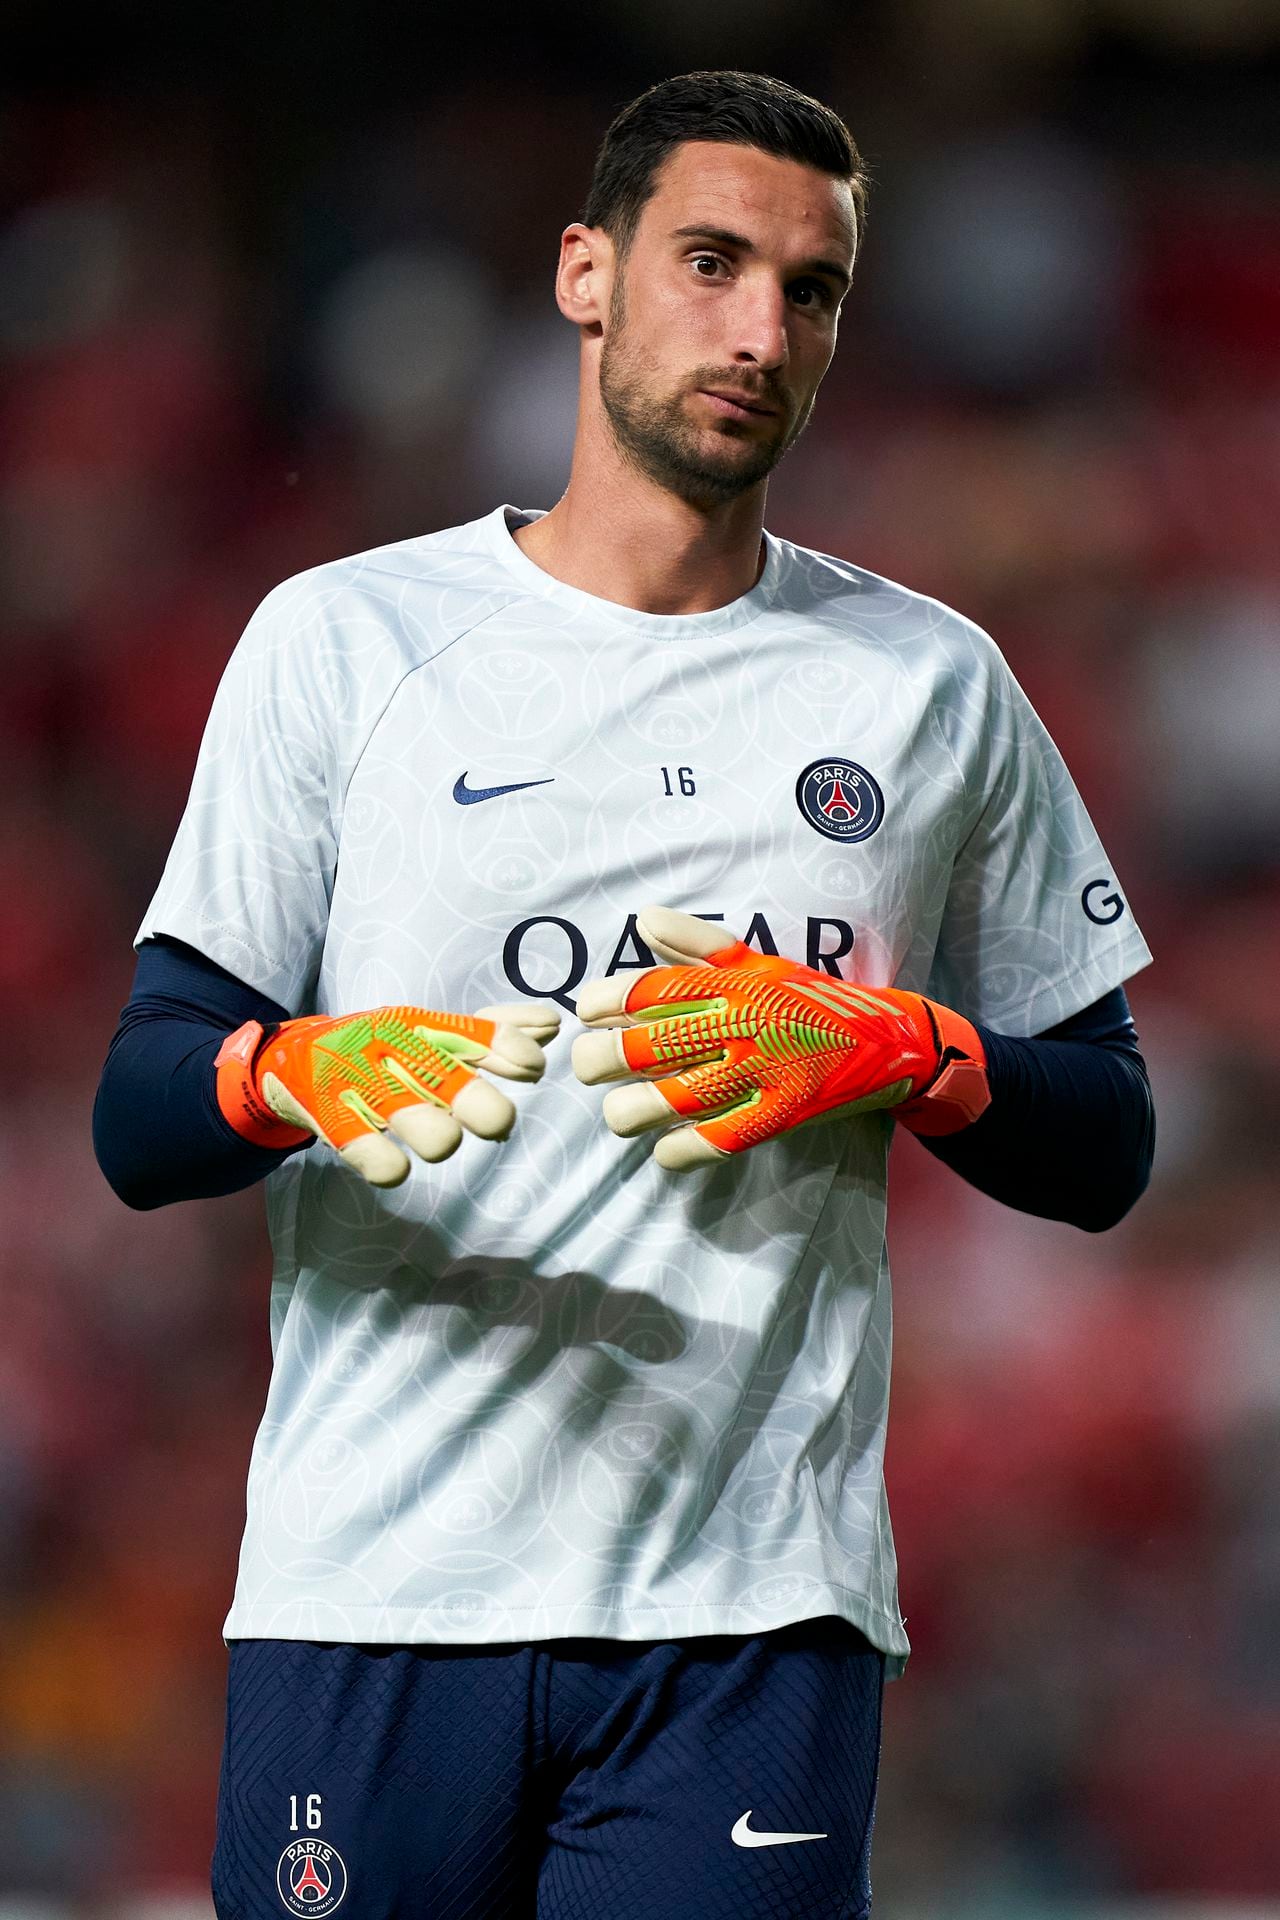 LISBON, PORTUGAL - OCTOBER 05:  Sergio Rico of Paris Saint-Germain FC warms up prior to the UEFA Champions League group H match between SL Benfica and Paris Saint-Germain at Estadio do Sport Lisboa e Benfica on October 05, 2022 in Lisbon, Portugal. (Photo by Jose Manuel Alvarez/Quality Sport Images/Getty Images)